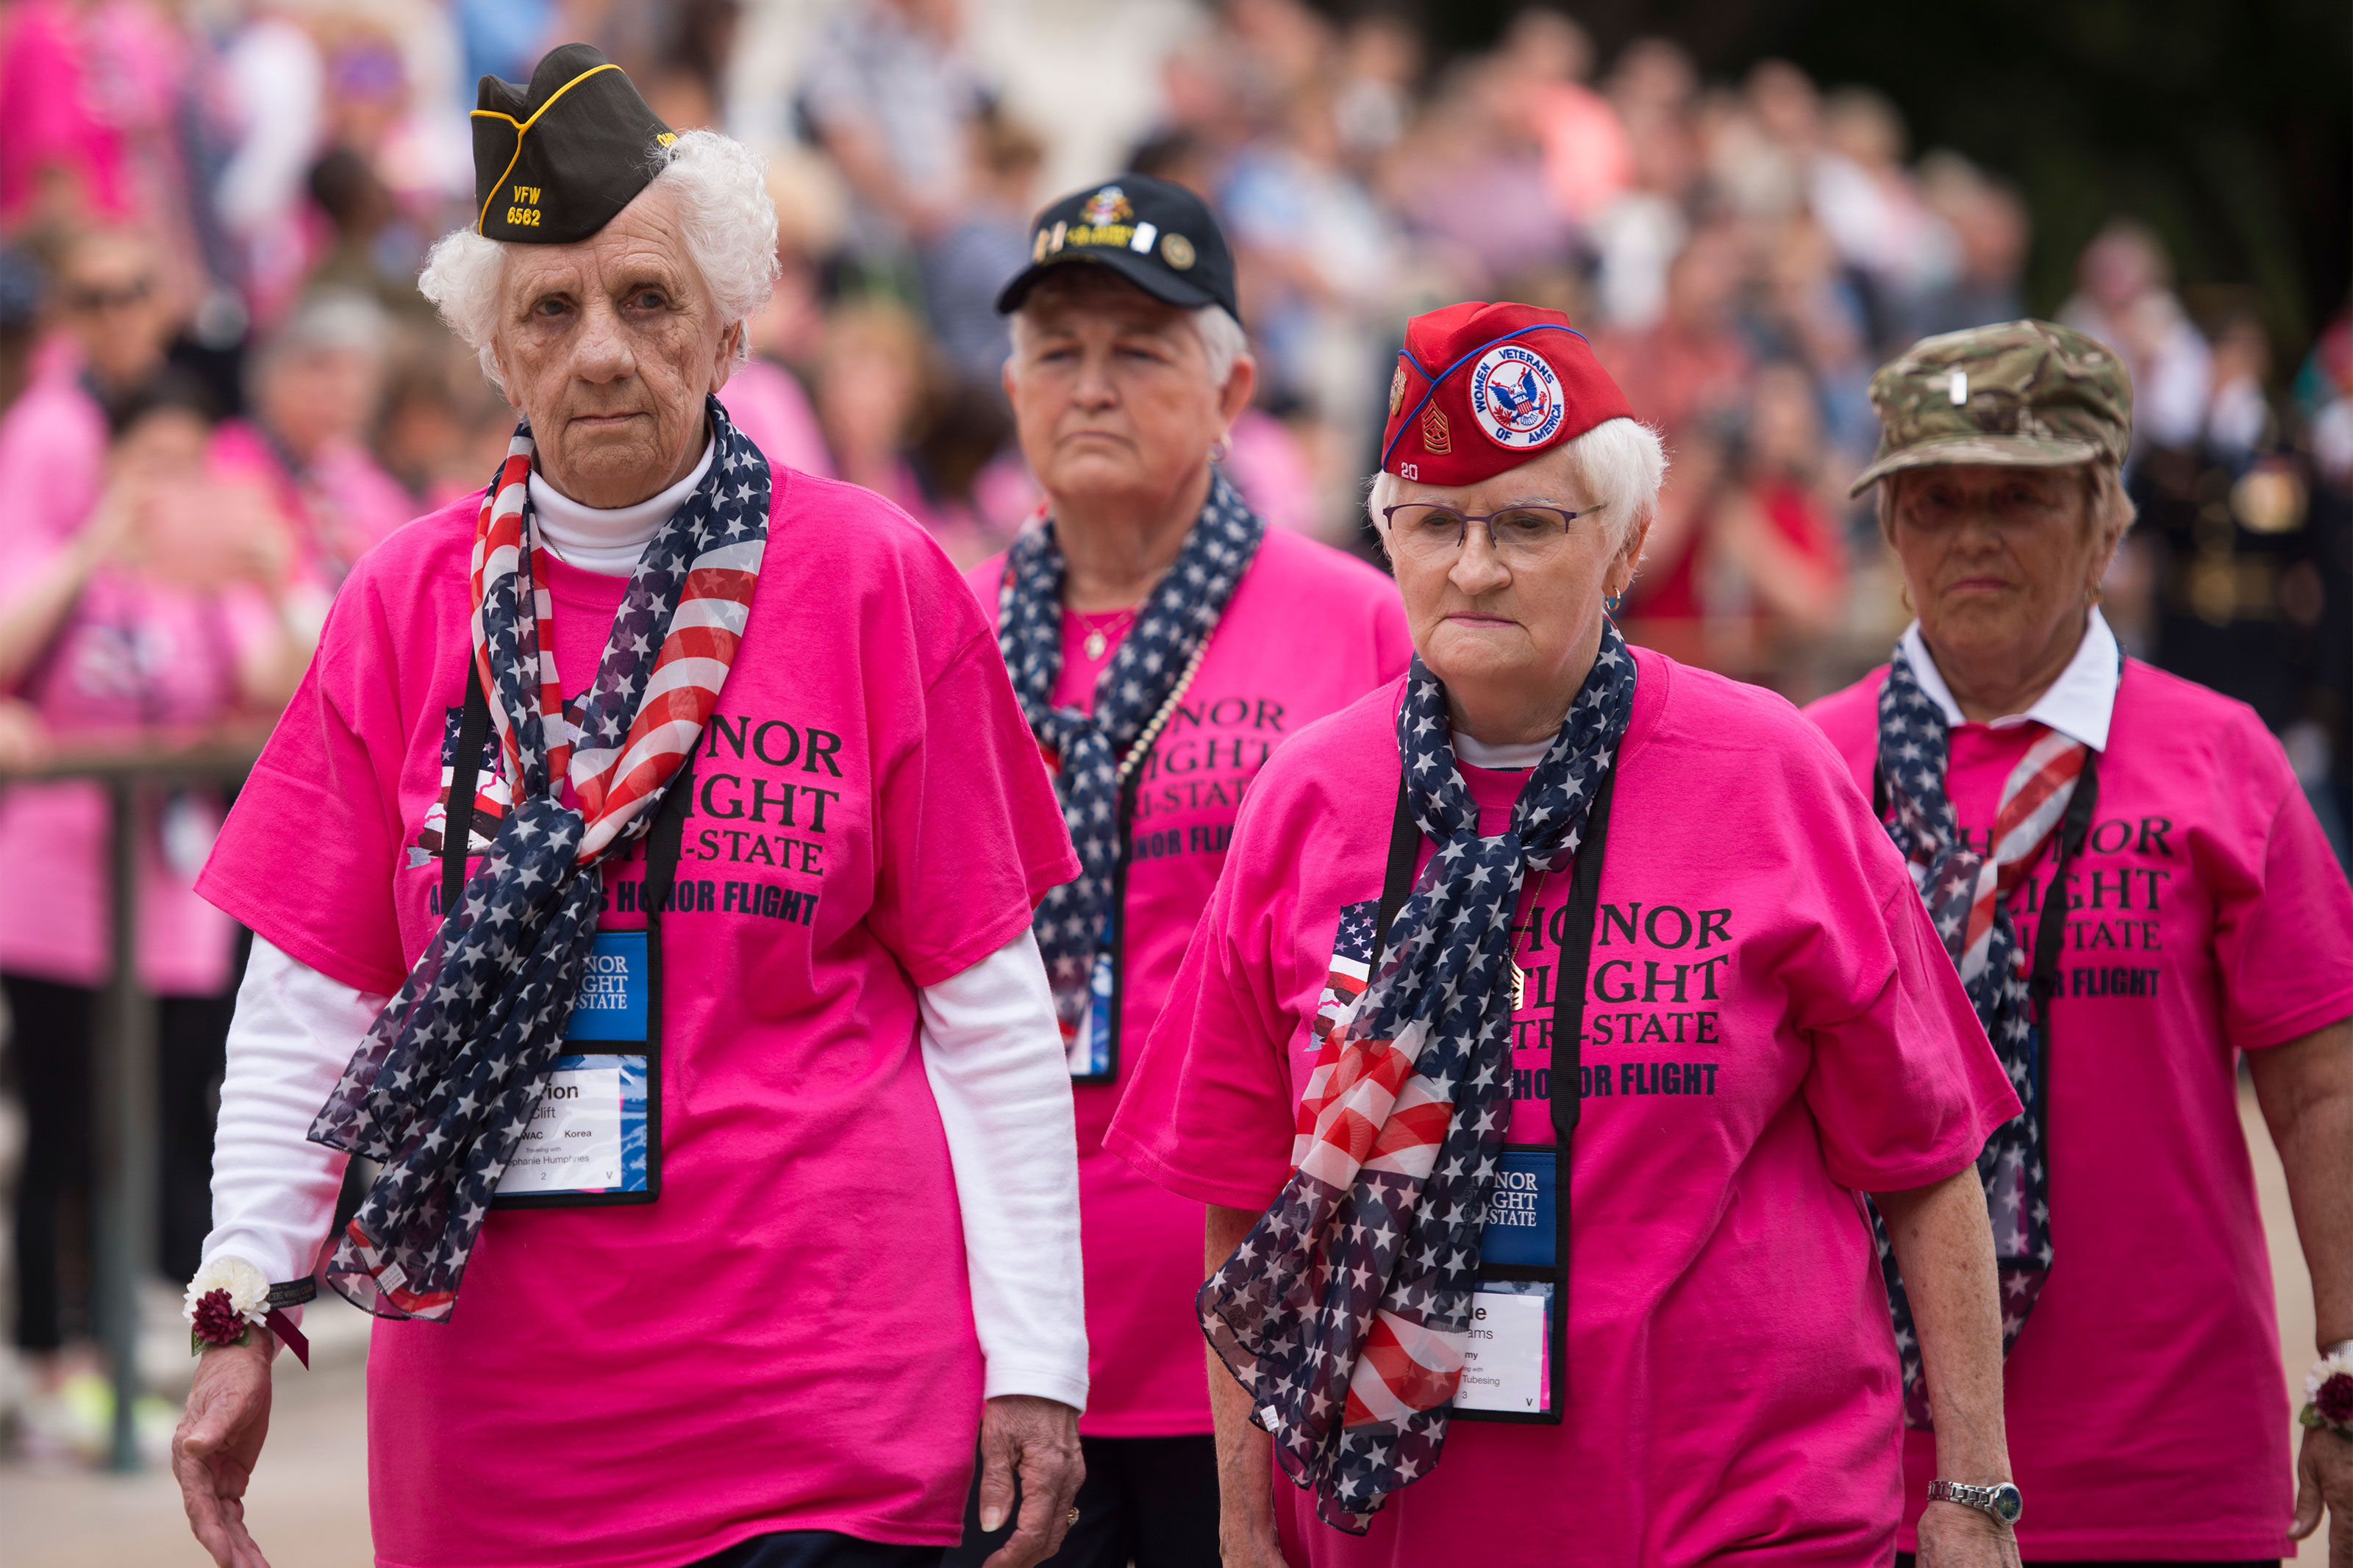 From the left, Women’s Army Corps veteran Marion Clift, Army veteran Betty Downs, Army veteran Sue Williams and veteran Army nurse Beverly Reno walk away from the Tomb of the Unknown Soldier after laying a wreath at Arlington National Cemetery, Sept. 22, 2015, in Arlington, Va. They are part of the first all-female honor flight in the United States. 75 female veterans from World War II, Korean War and Vietnam War were in attendance, as well as 75 escorts, who were also female veterans or active-duty militar